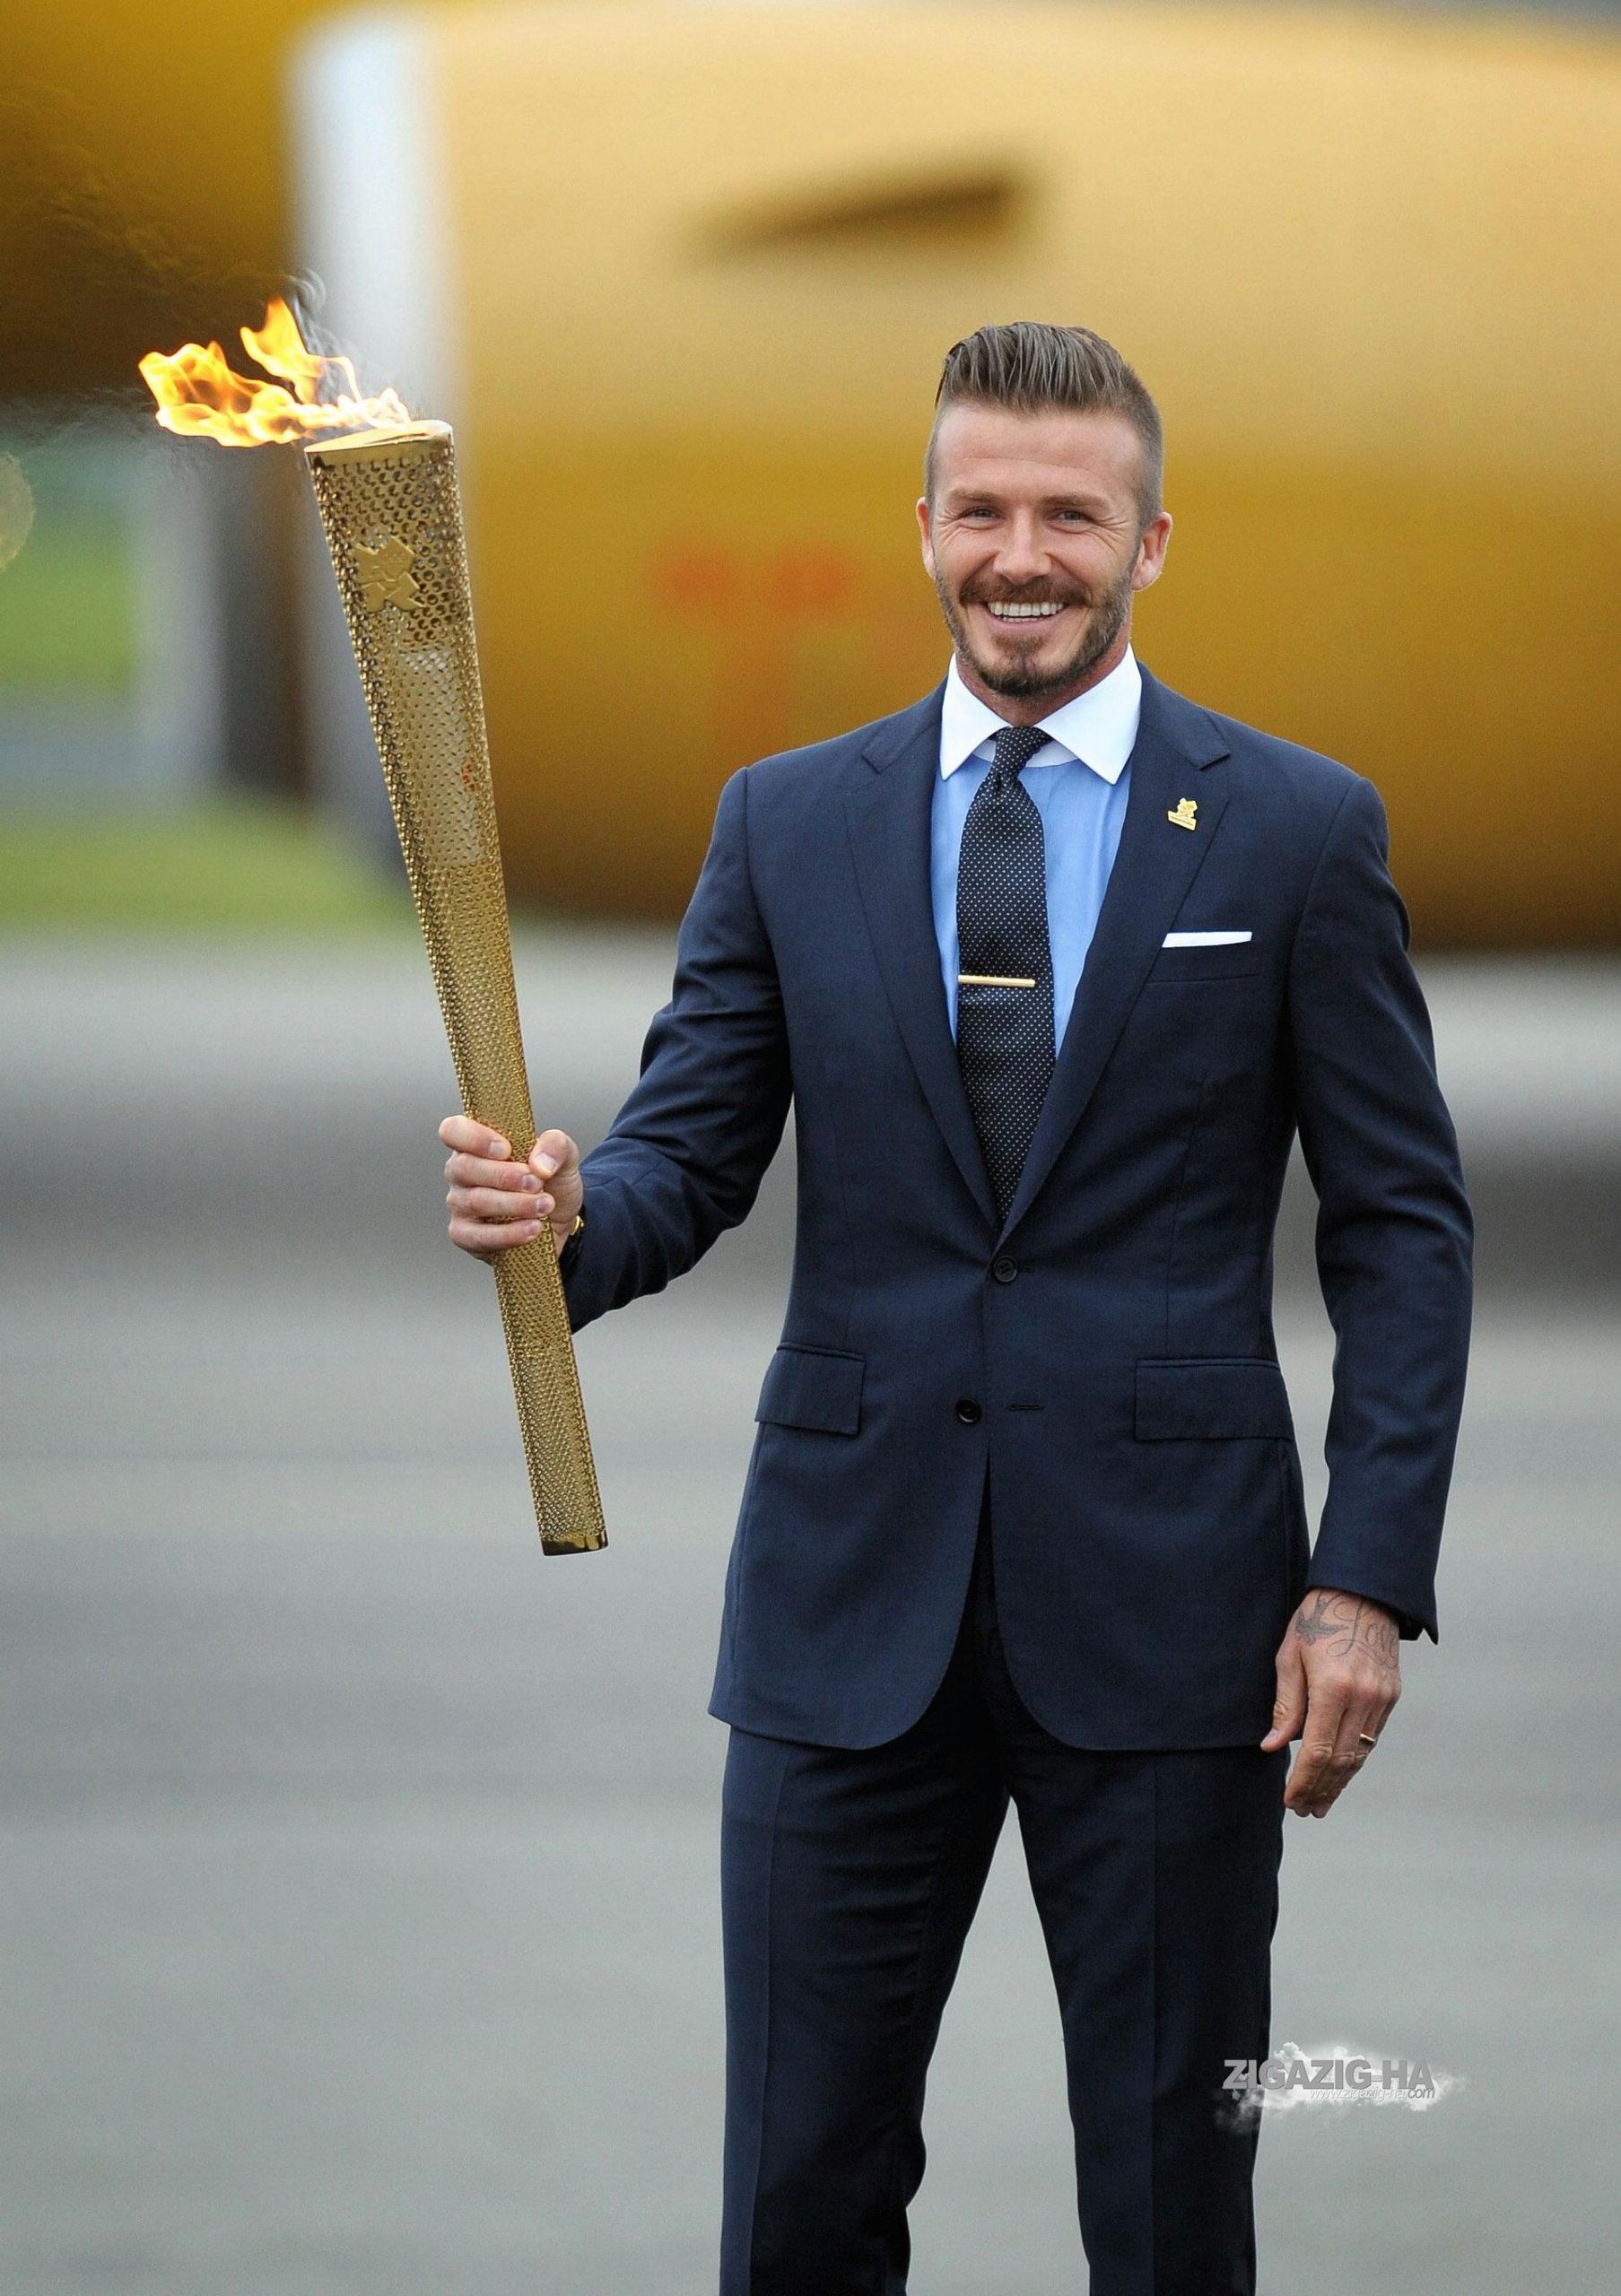 David Beckham With The London 2012 Olympic Games Flame At Royal Naval Air Station